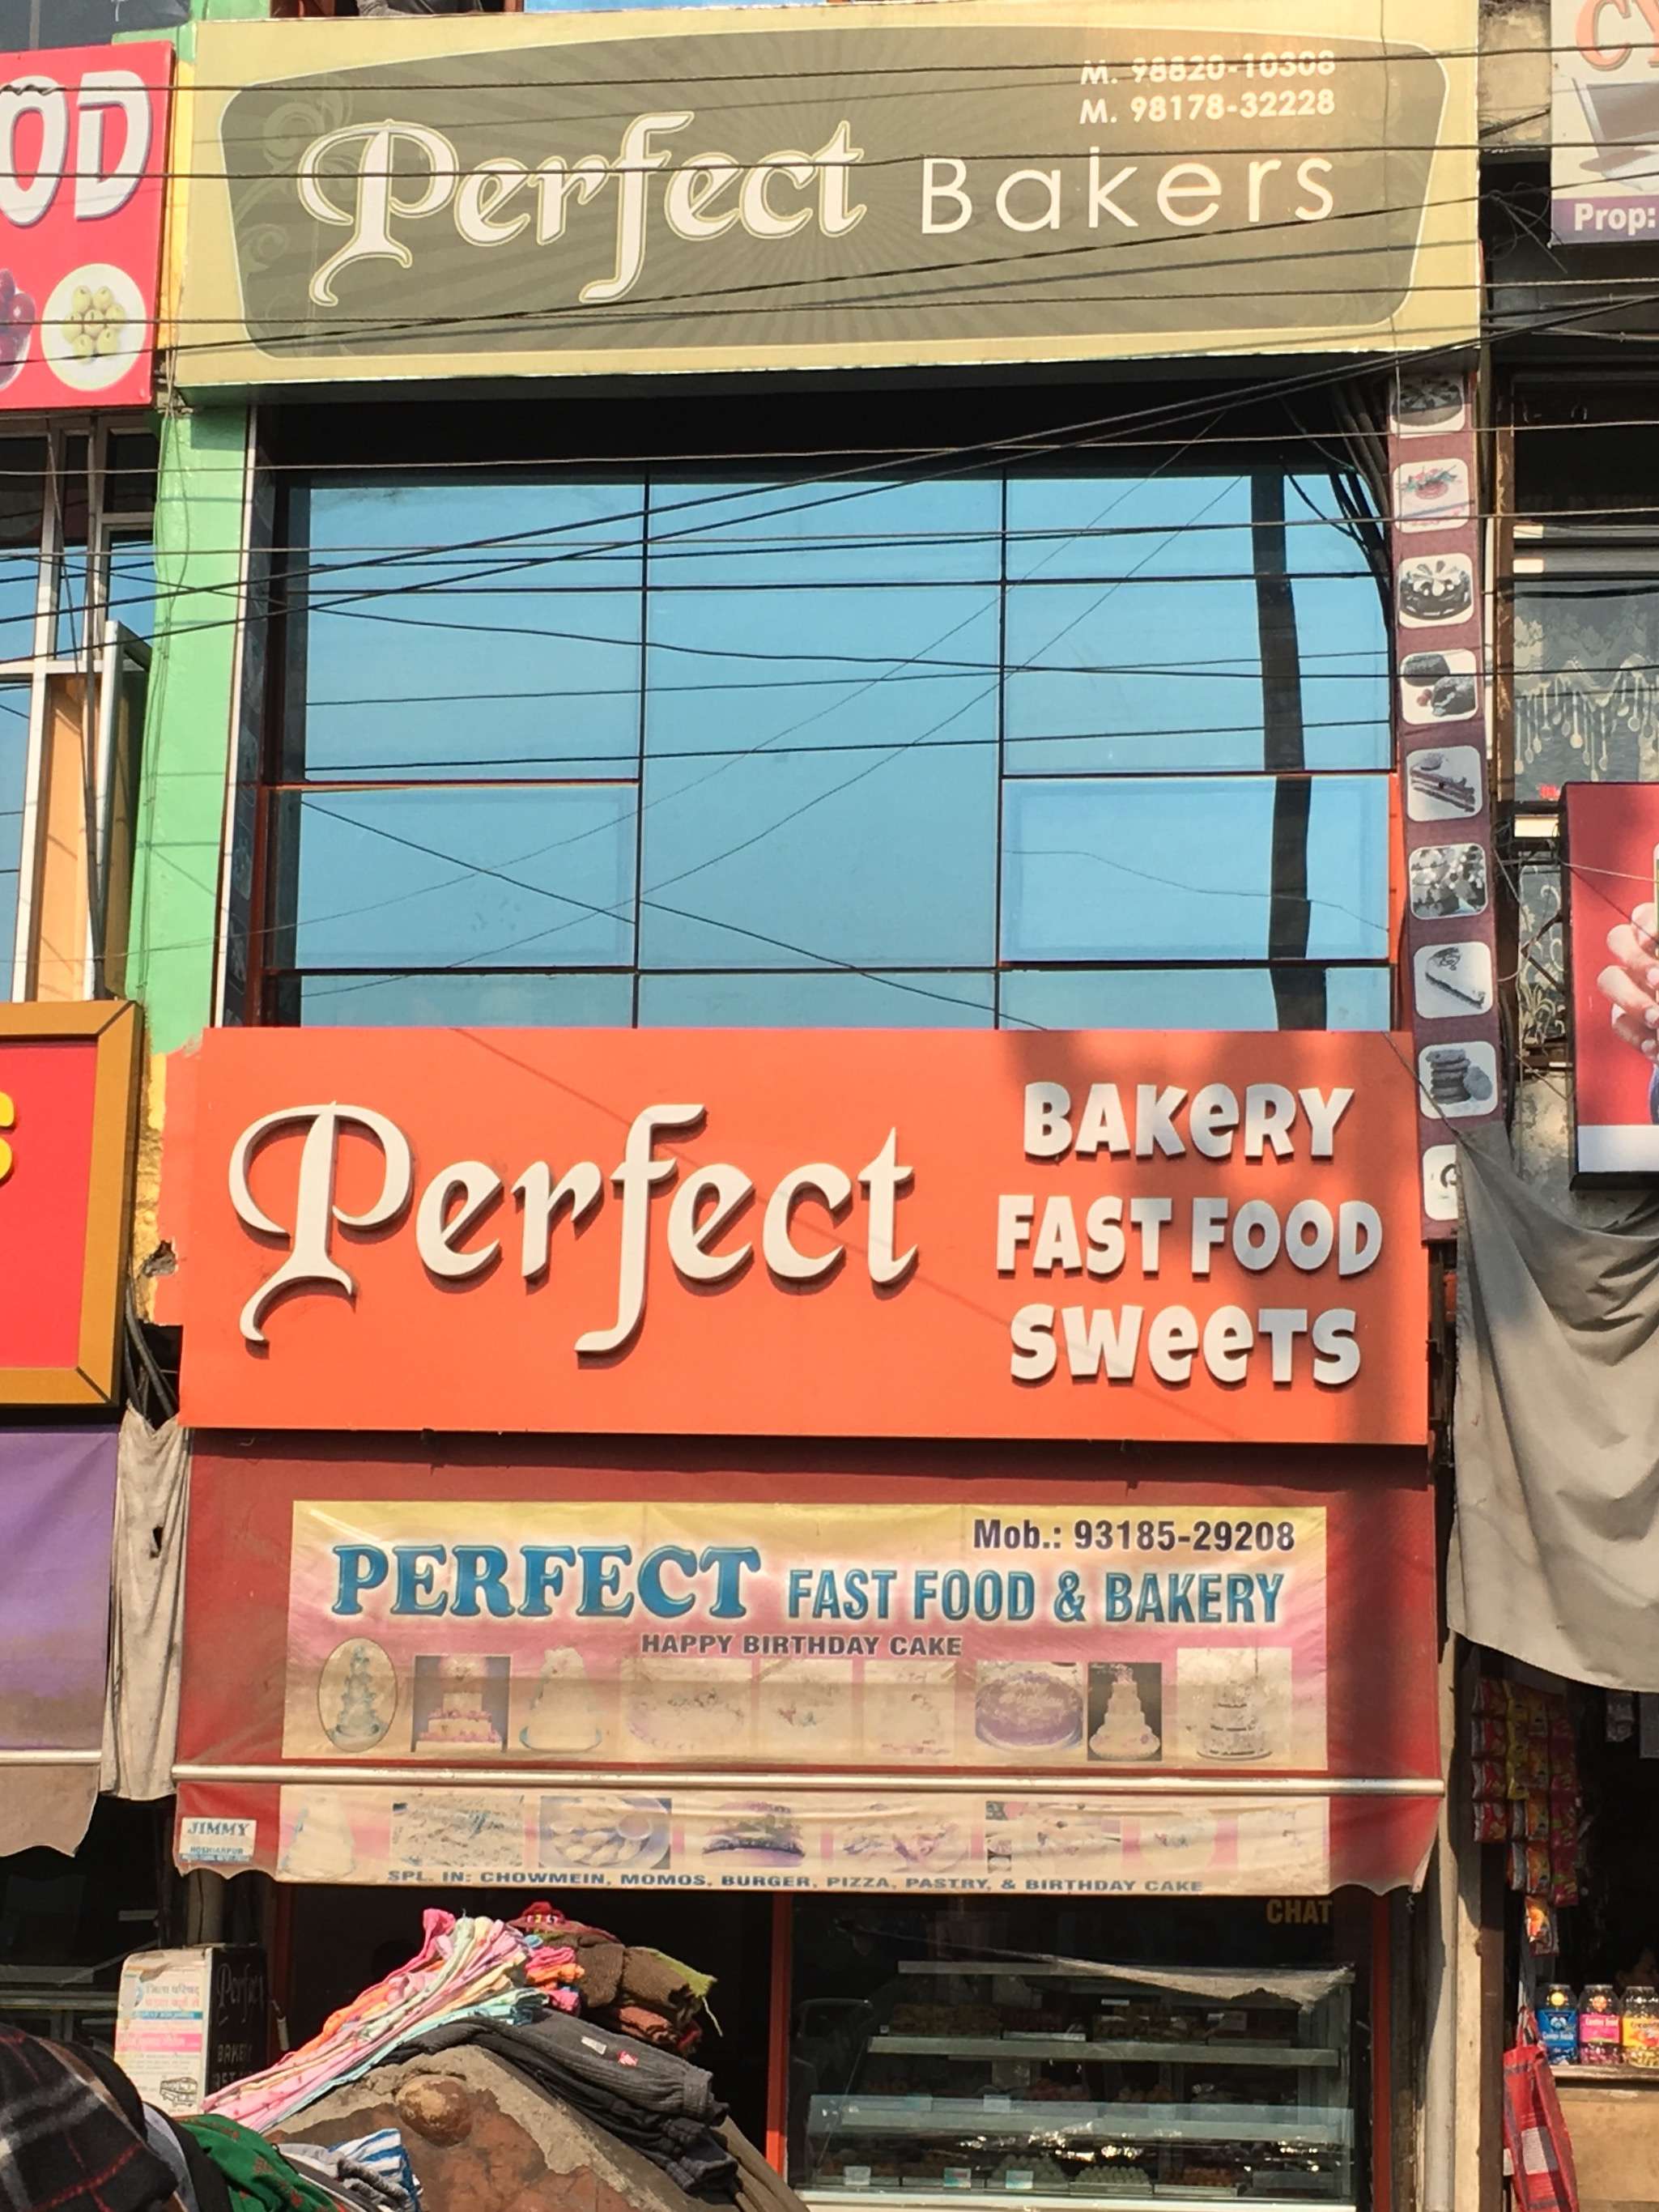 Perfect Bakery Fast Food &sweets